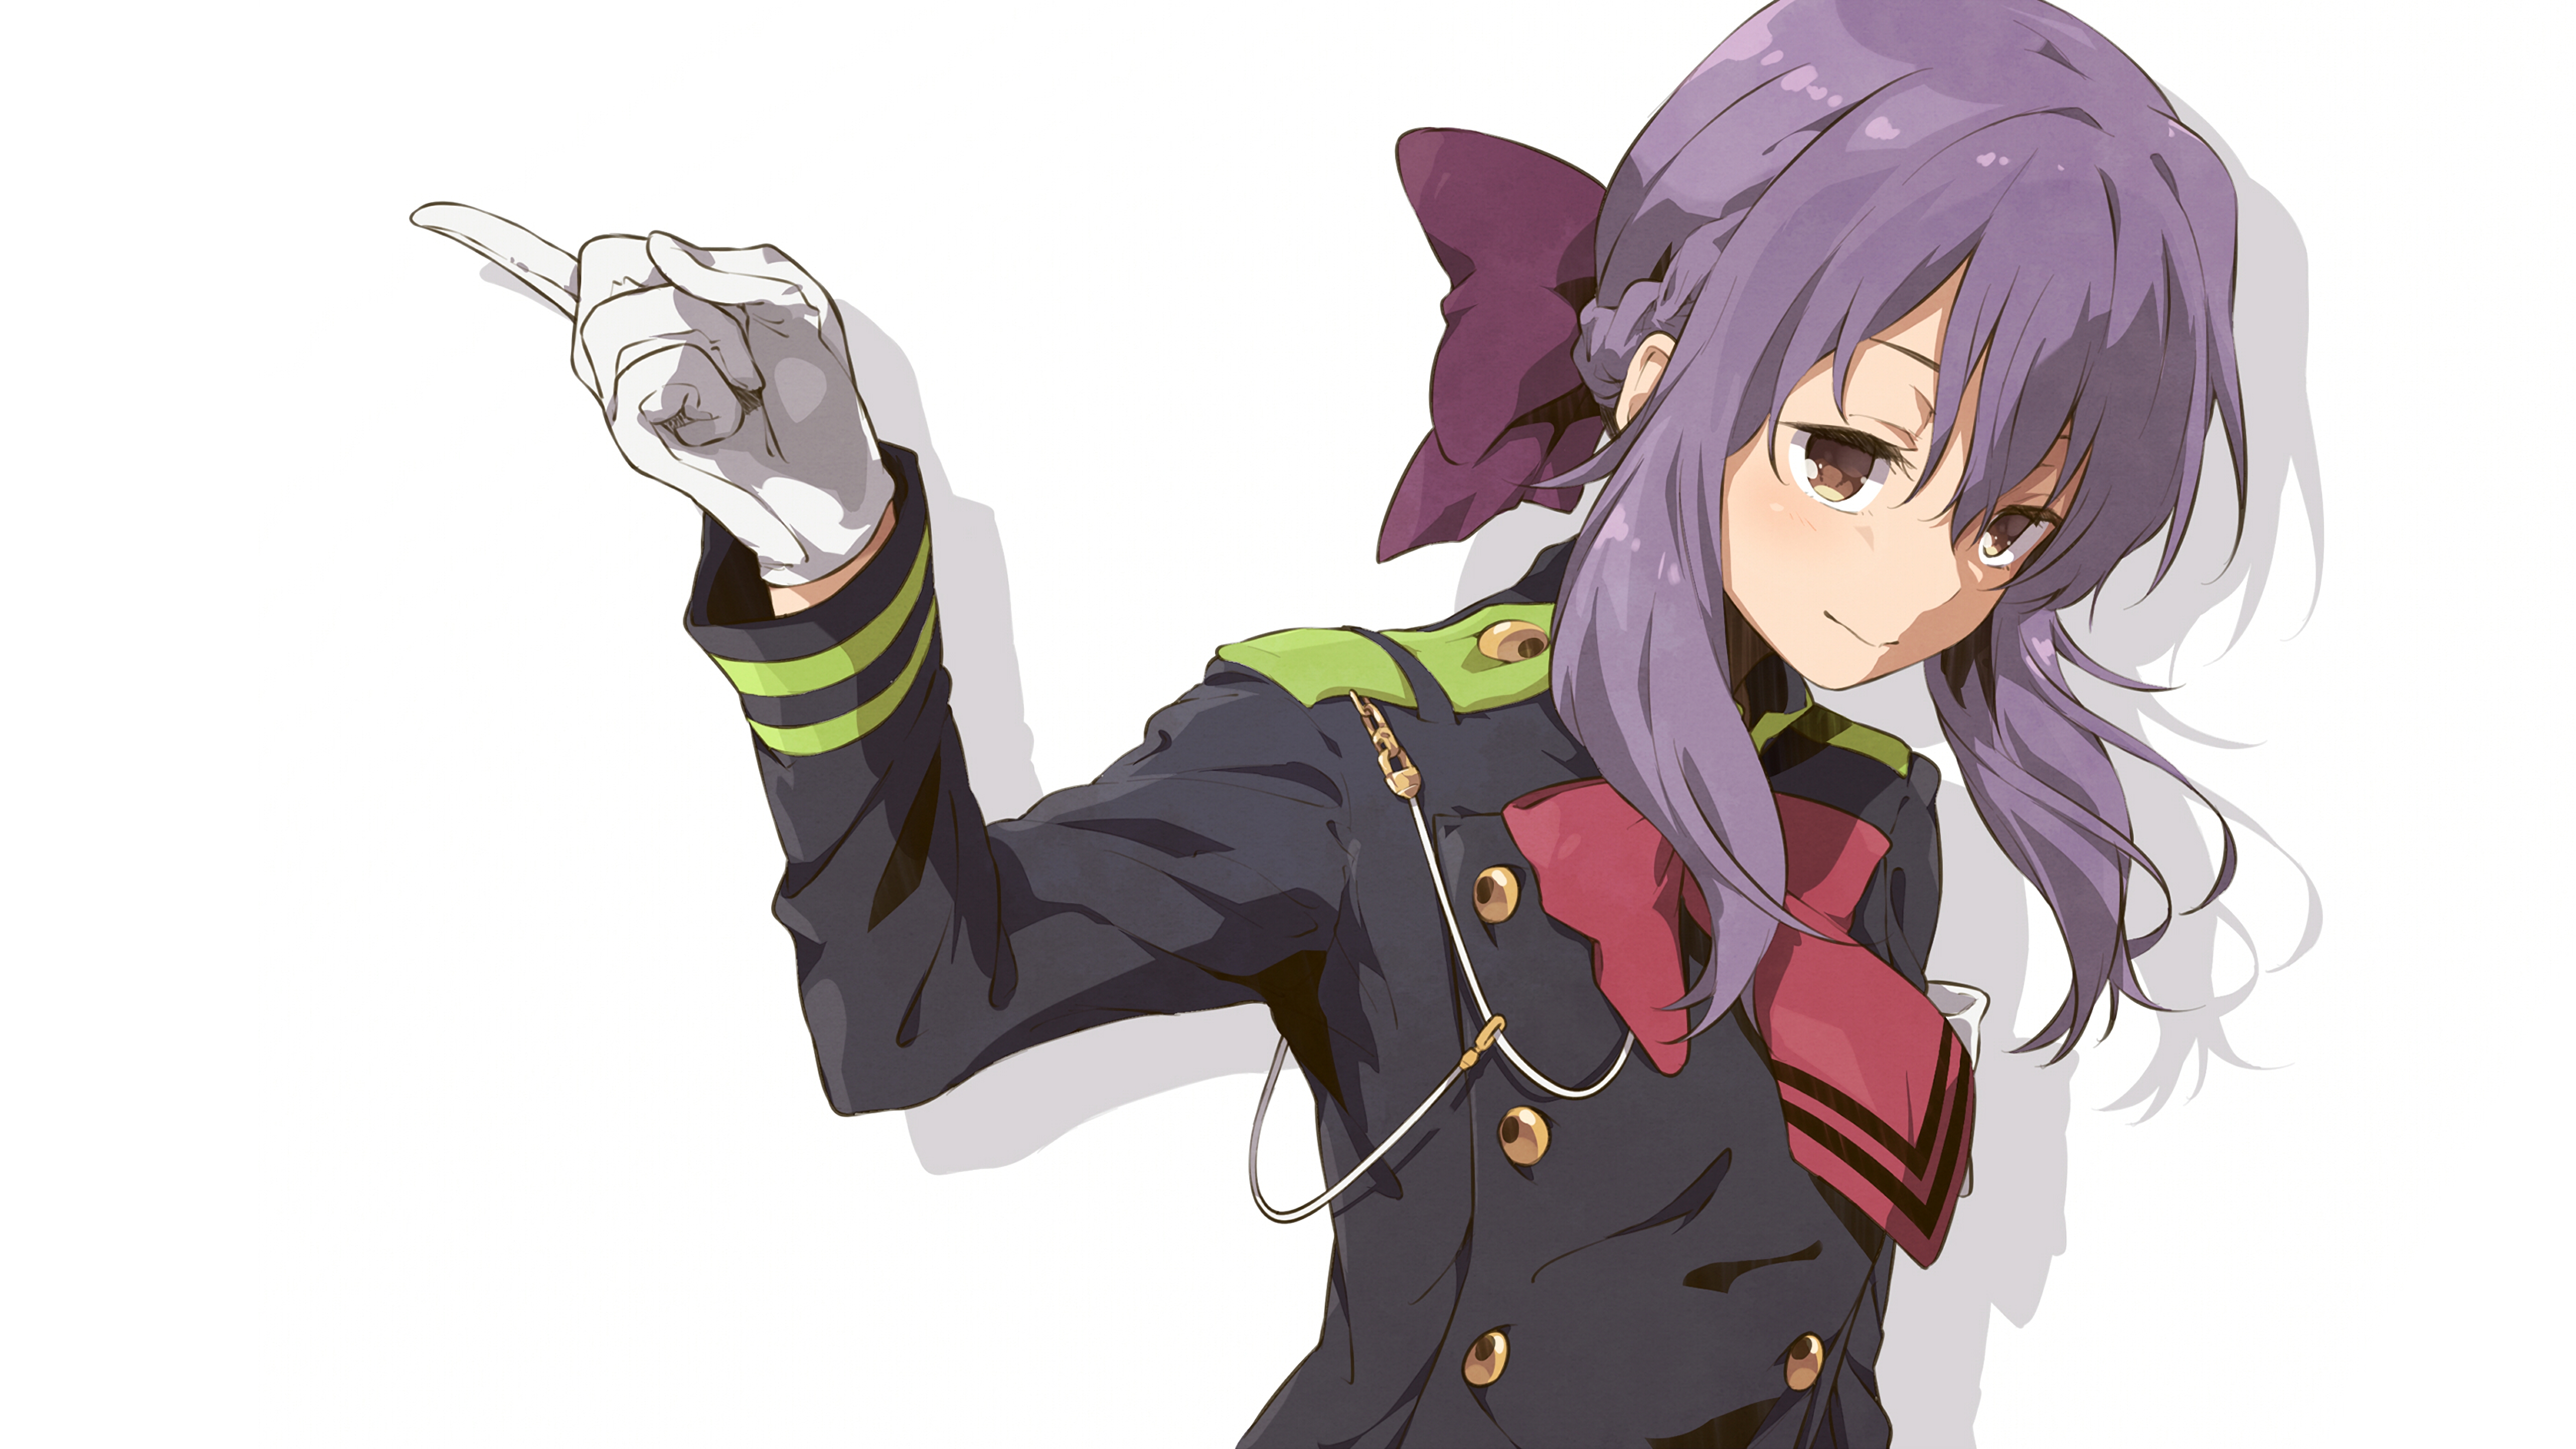 Anime Seraph of the End 4k Ultra HD Wallpaper by haine